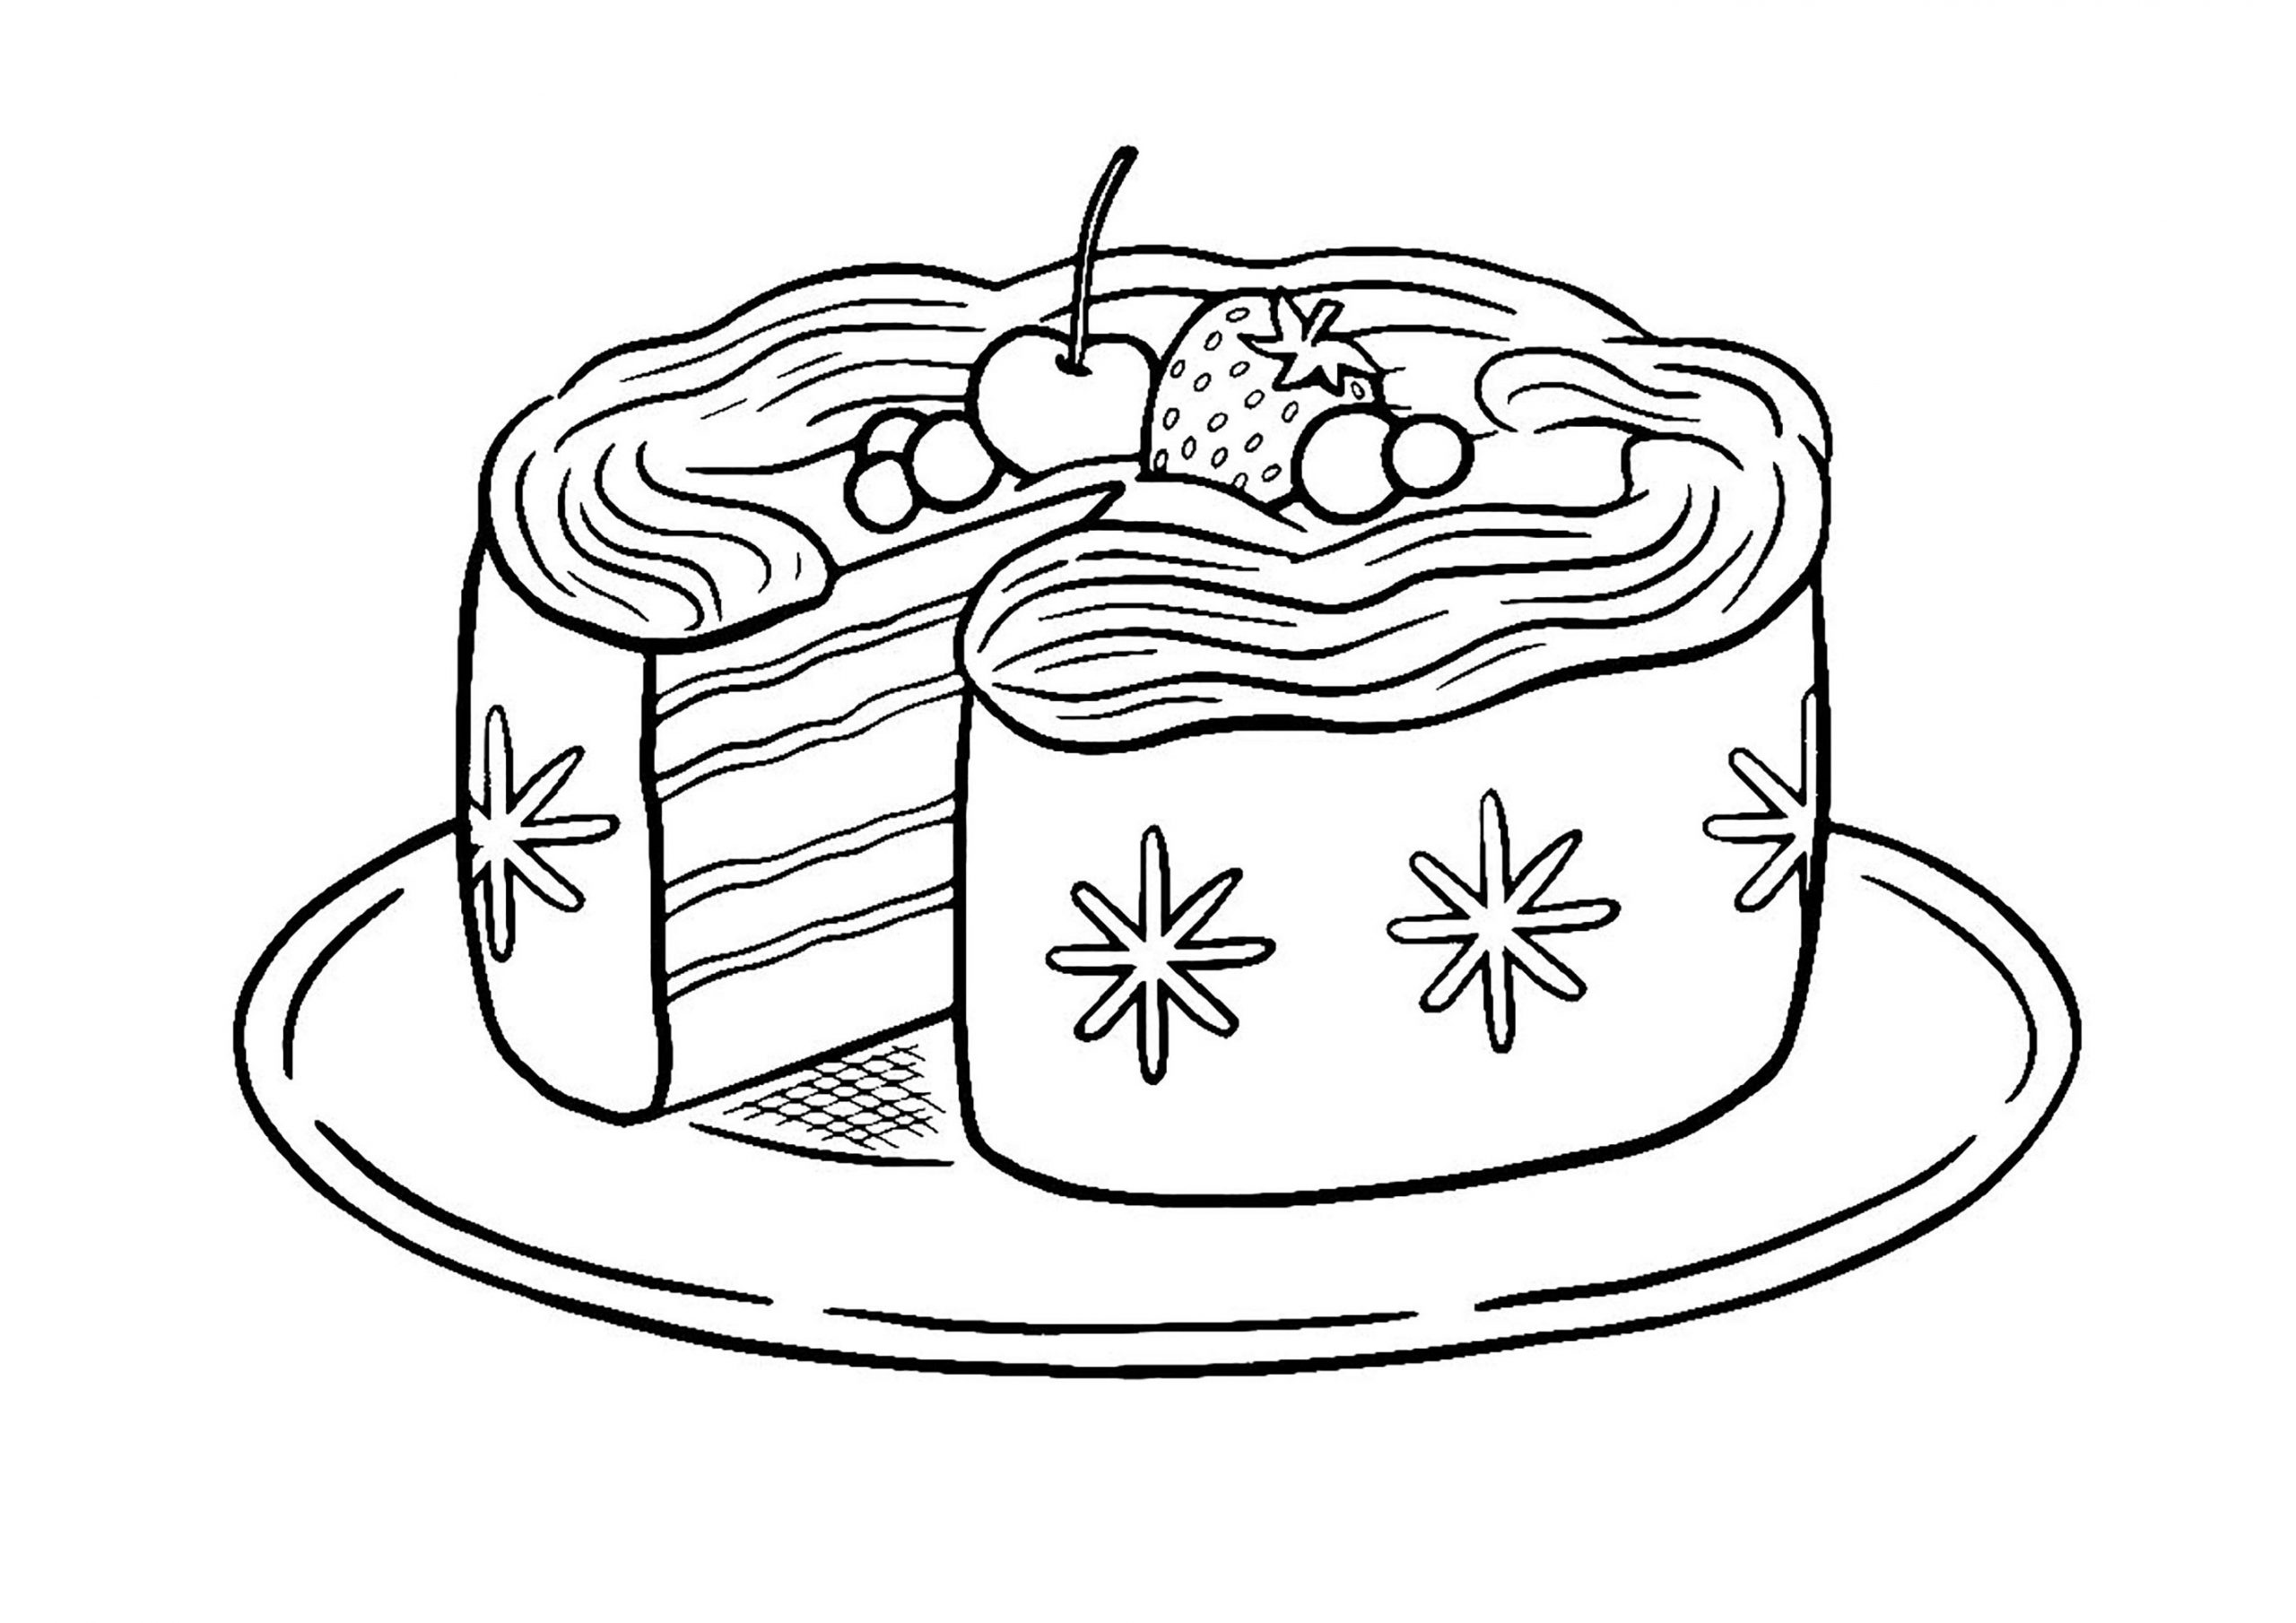 image=cupcakes and cakes coloring pages for children cupcakes and cakes 1